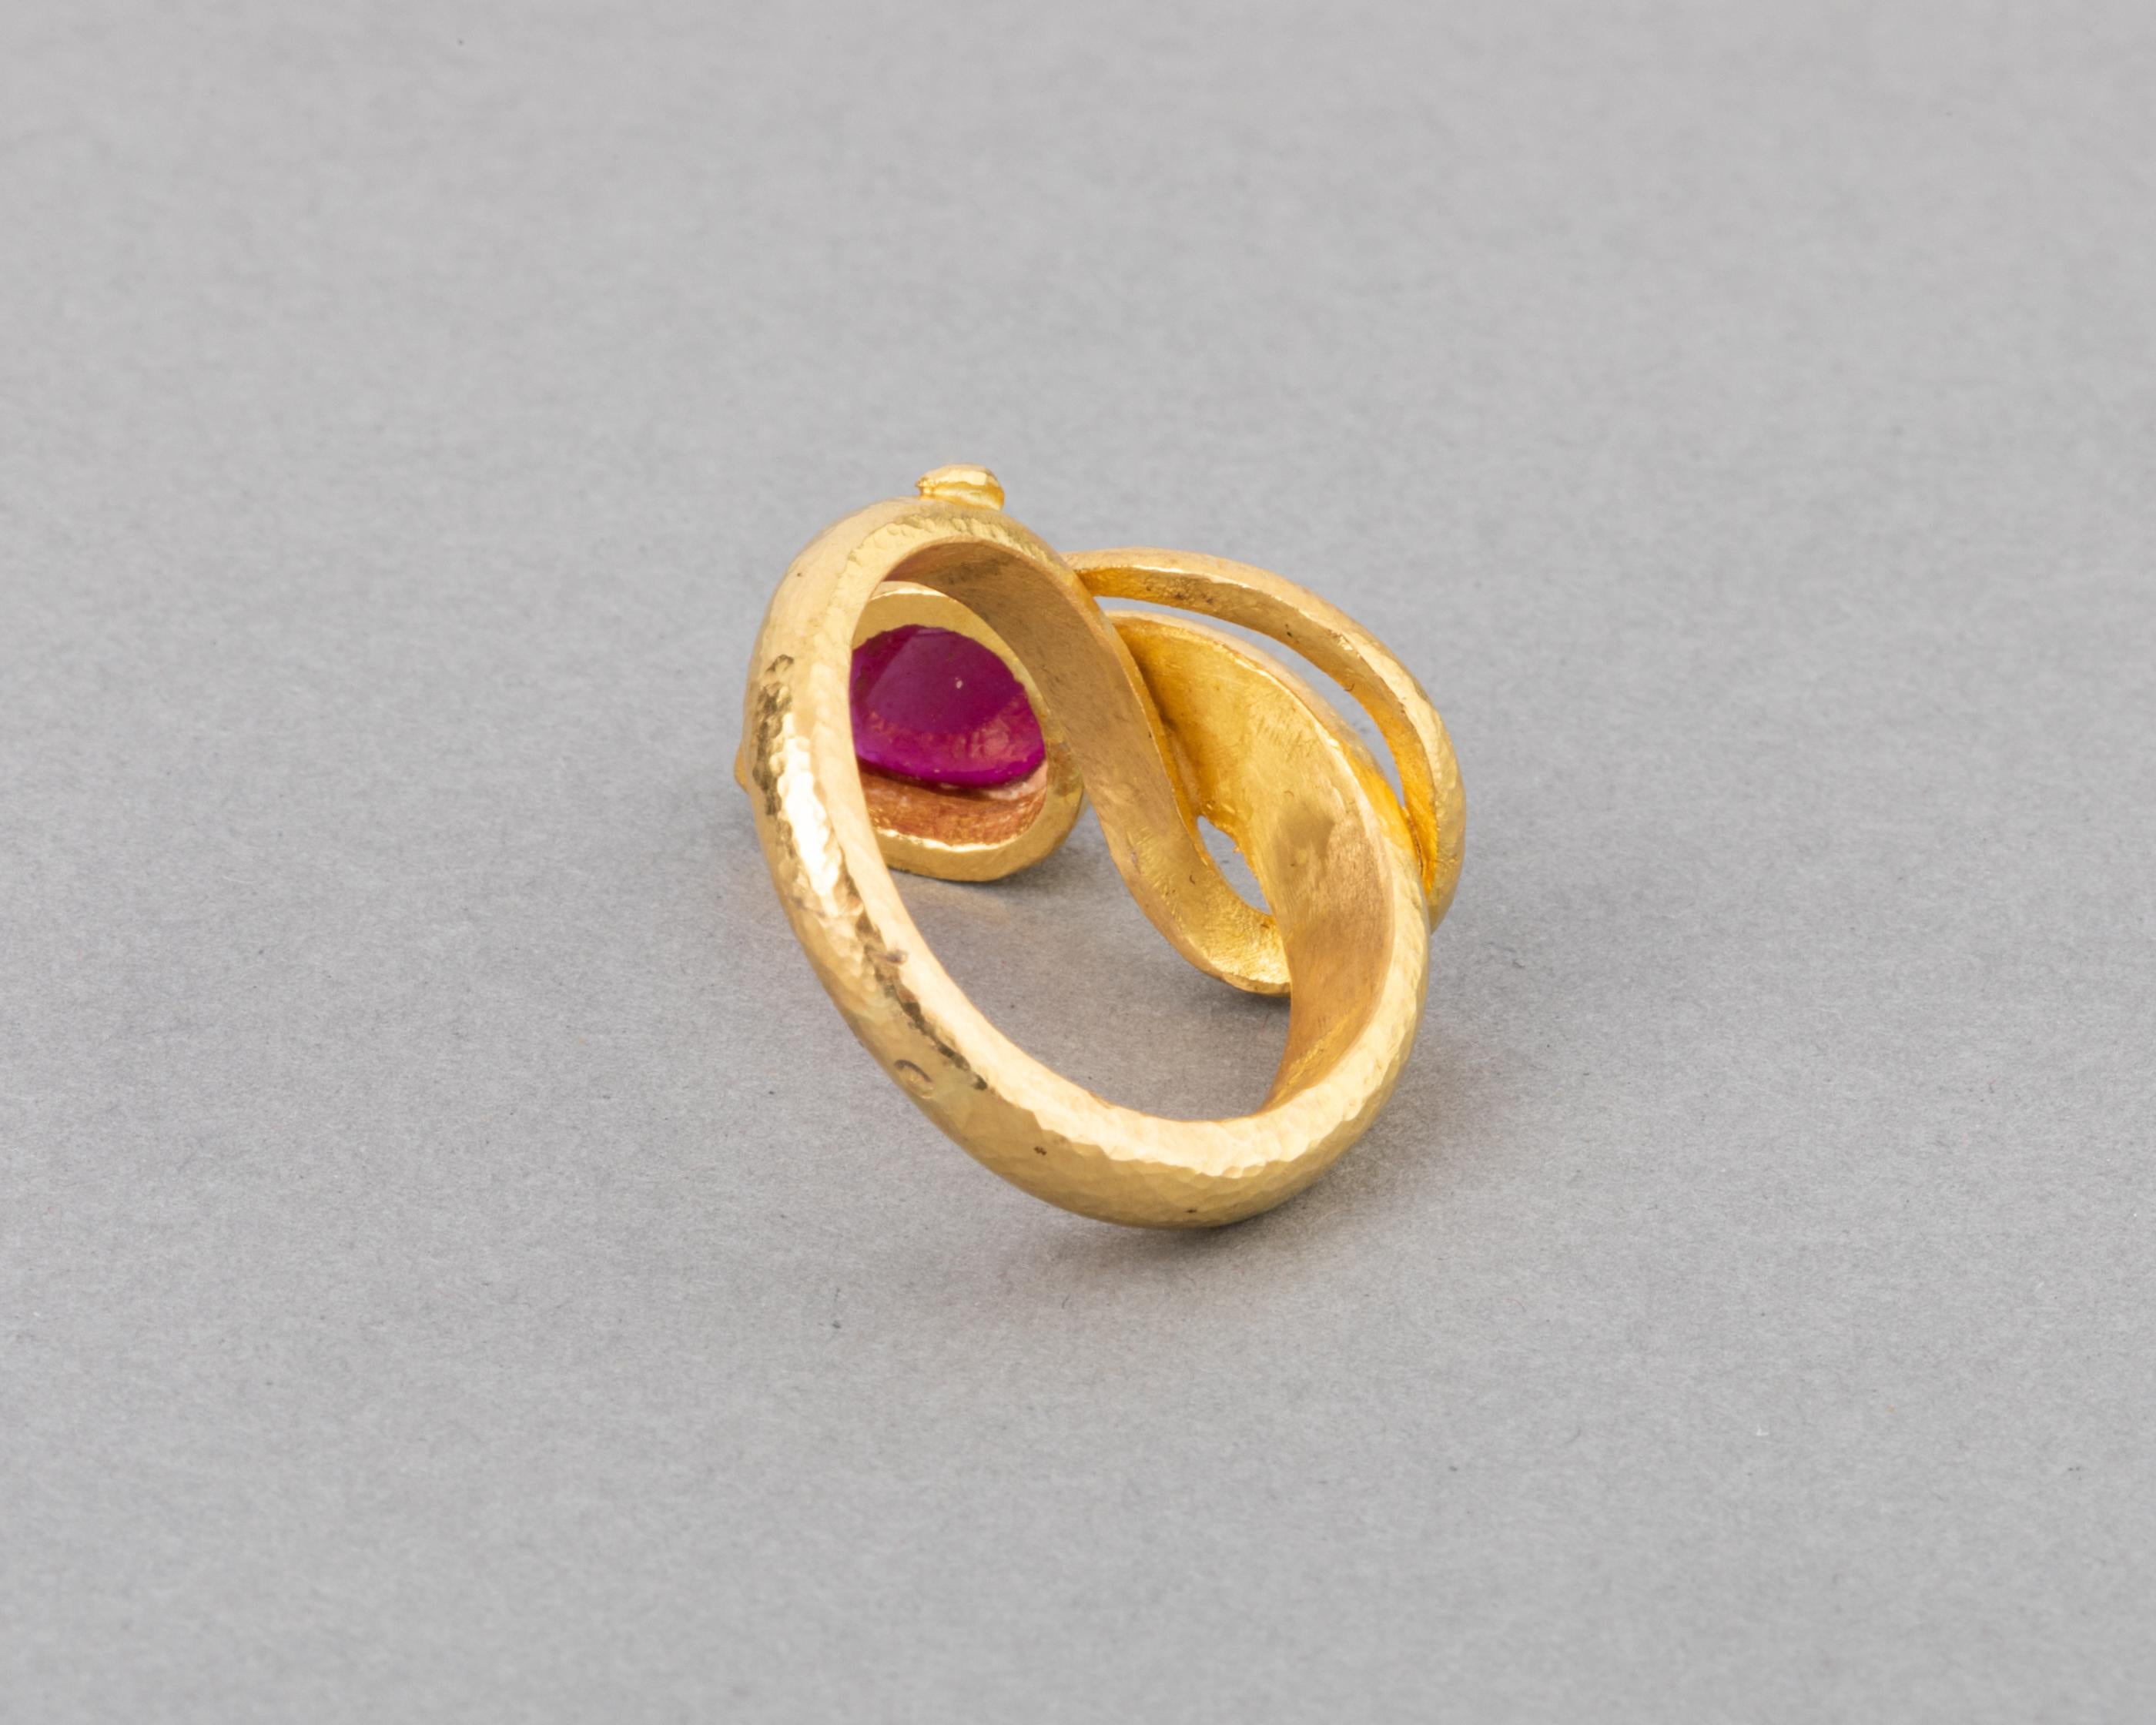 Gold and Ruby French Ring by Bernardeau 1